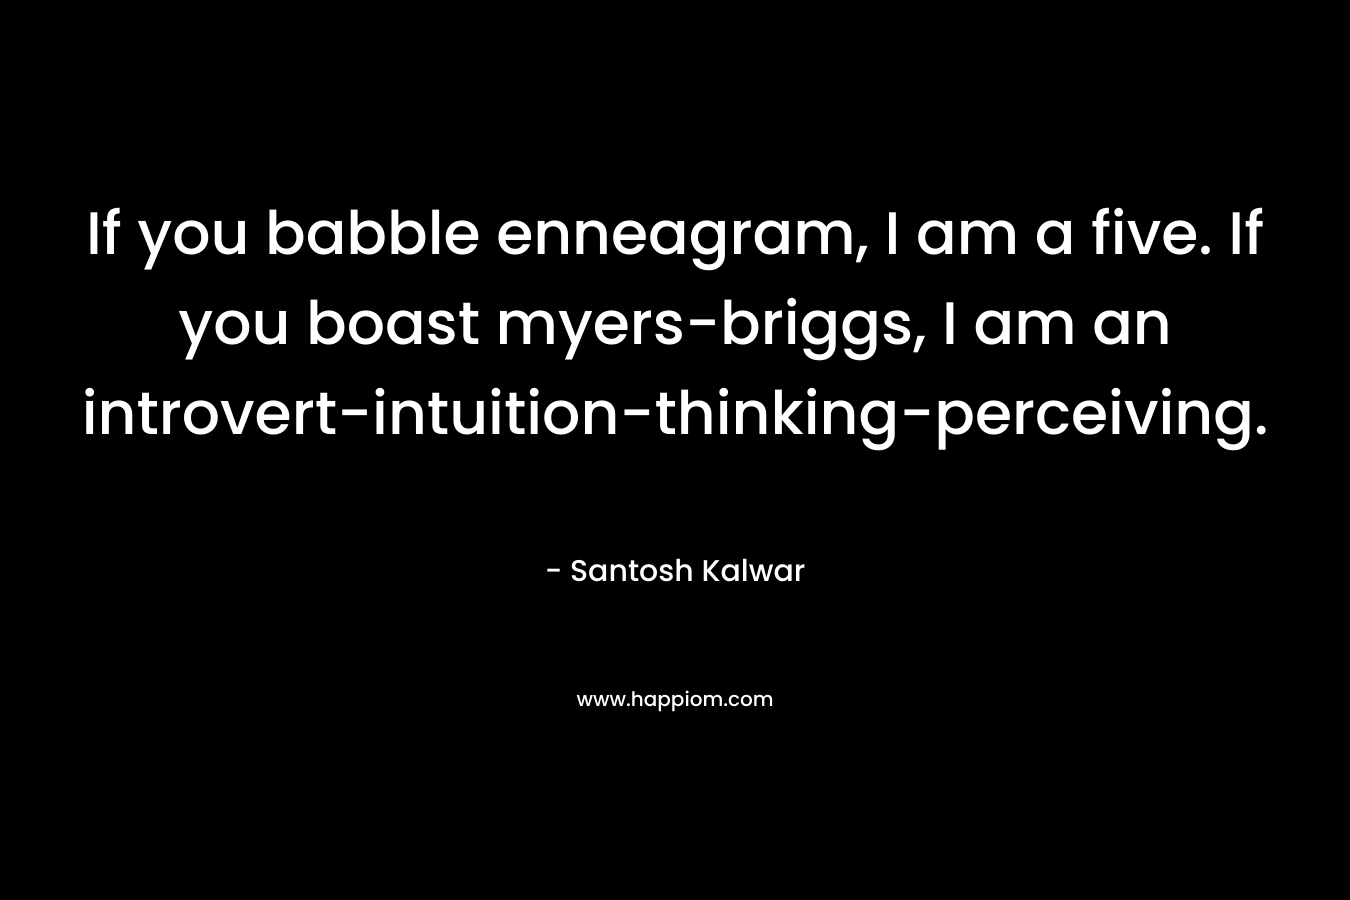 If you babble enneagram, I am a five. If you boast myers-briggs, I am an introvert-intuition-thinking-perceiving. – Santosh Kalwar